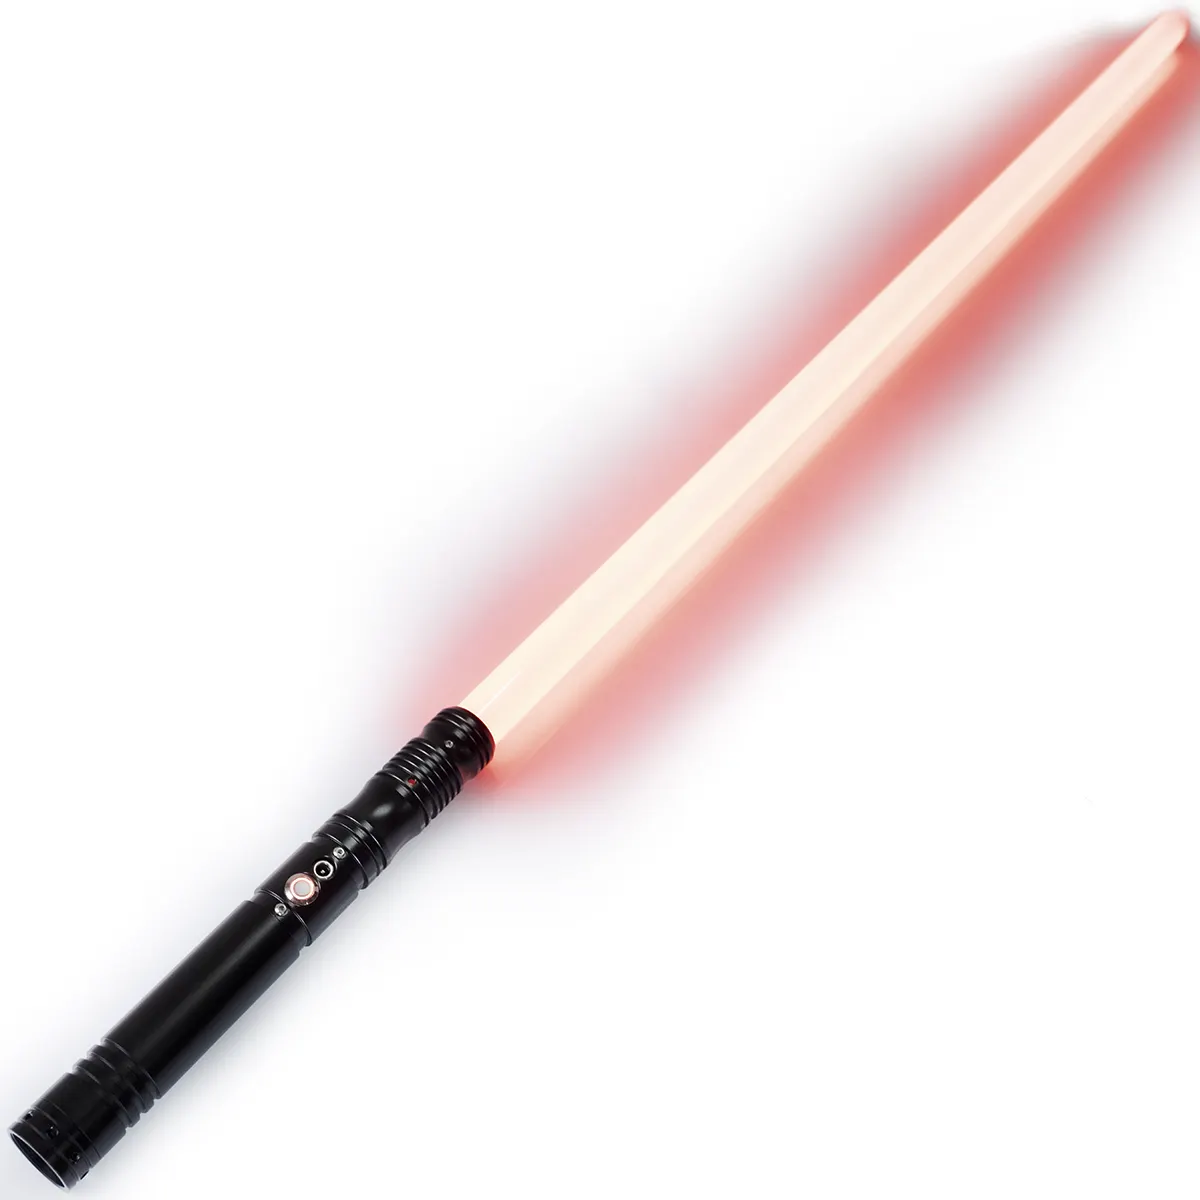 LGT SABERSTUDIO Colour FOC Light Up Toys heavy dueling Smooth swing Lightsaber Luminous toy for adults